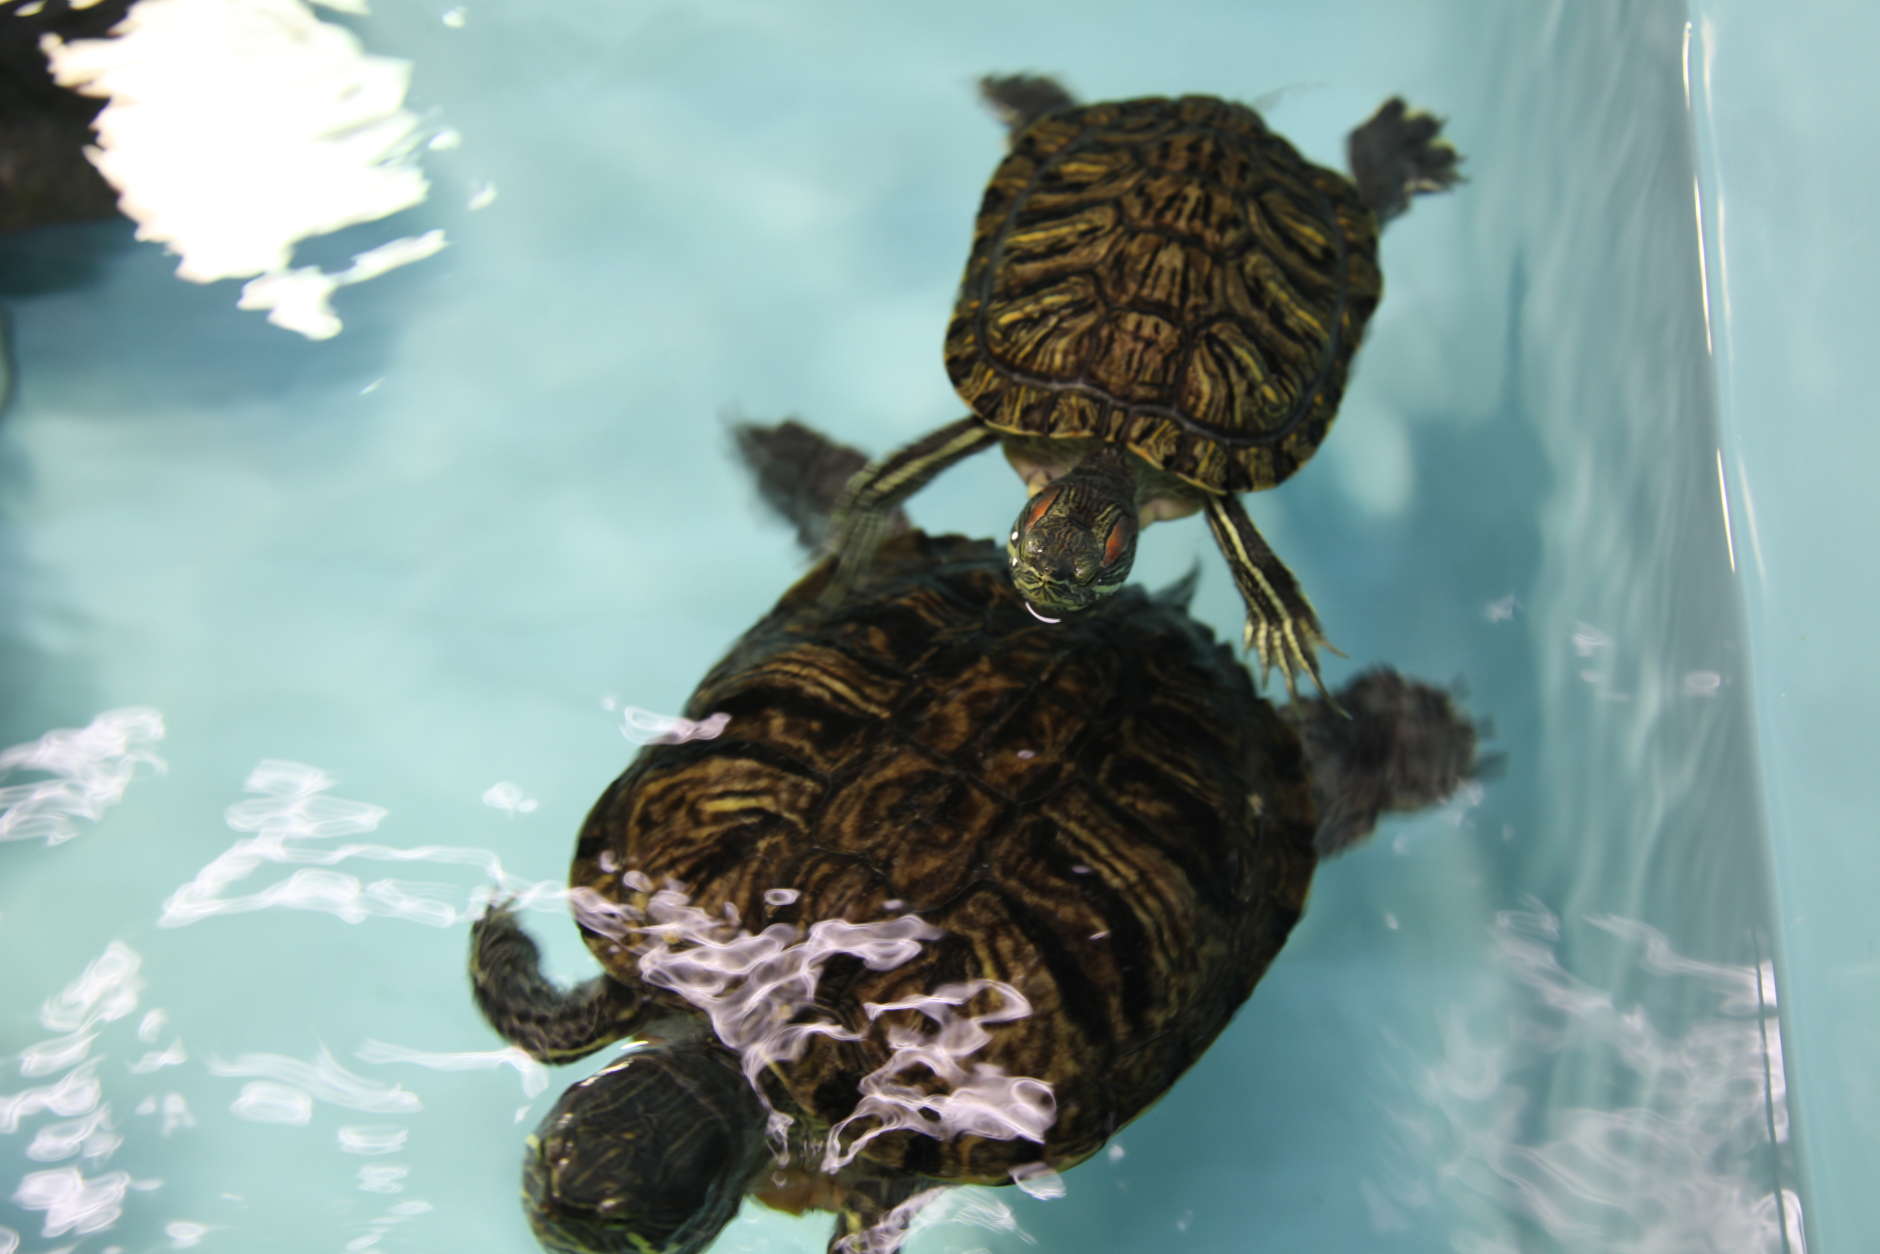 These turtles at the Aquatic Resources Education Center (AREC) in Anacostia Park are among more than 40 species of fish, amphibians, reptiles, invertebrates, and aquatic plants that can be found in the rivers, streams, and wetlands of D.C. and Chesapeake Bay. (Courtesy DOEE)